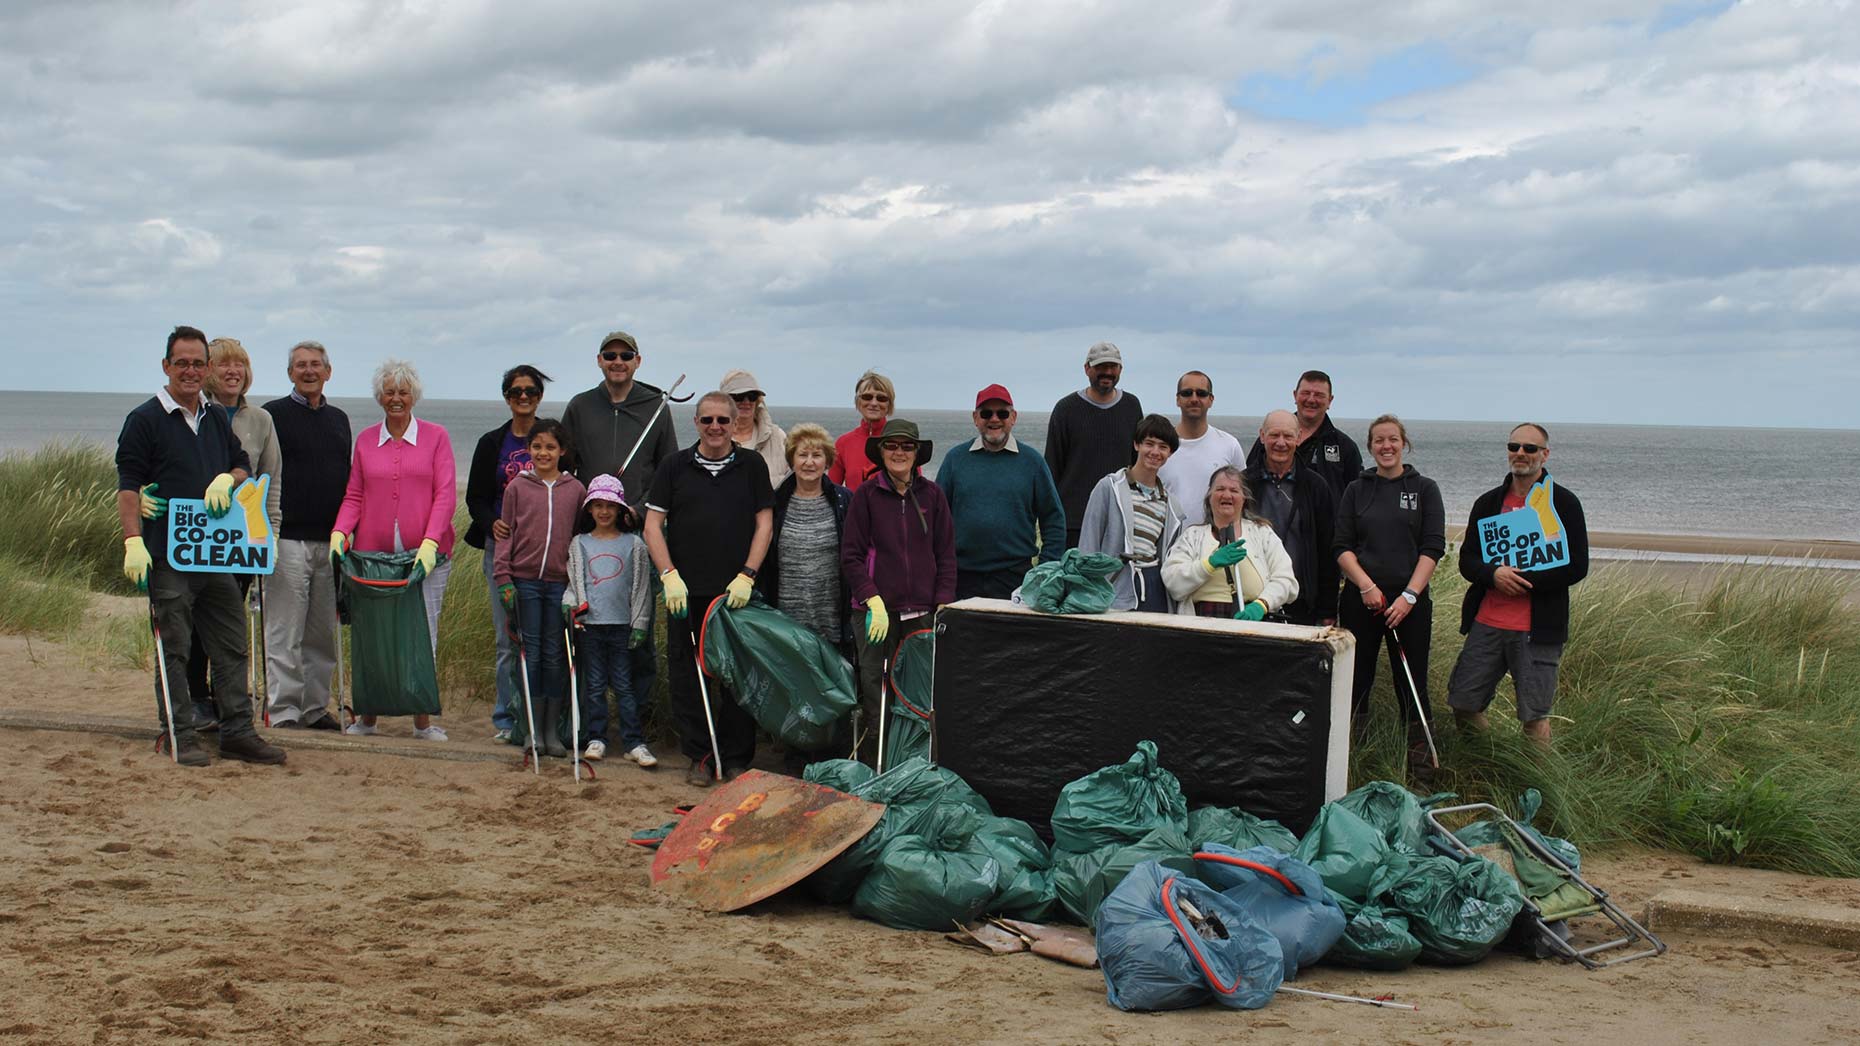  Lincolnshire Co-op staff and members took part in clean up events across the area, including at Huttoft Beach near Chapel St Leonards.